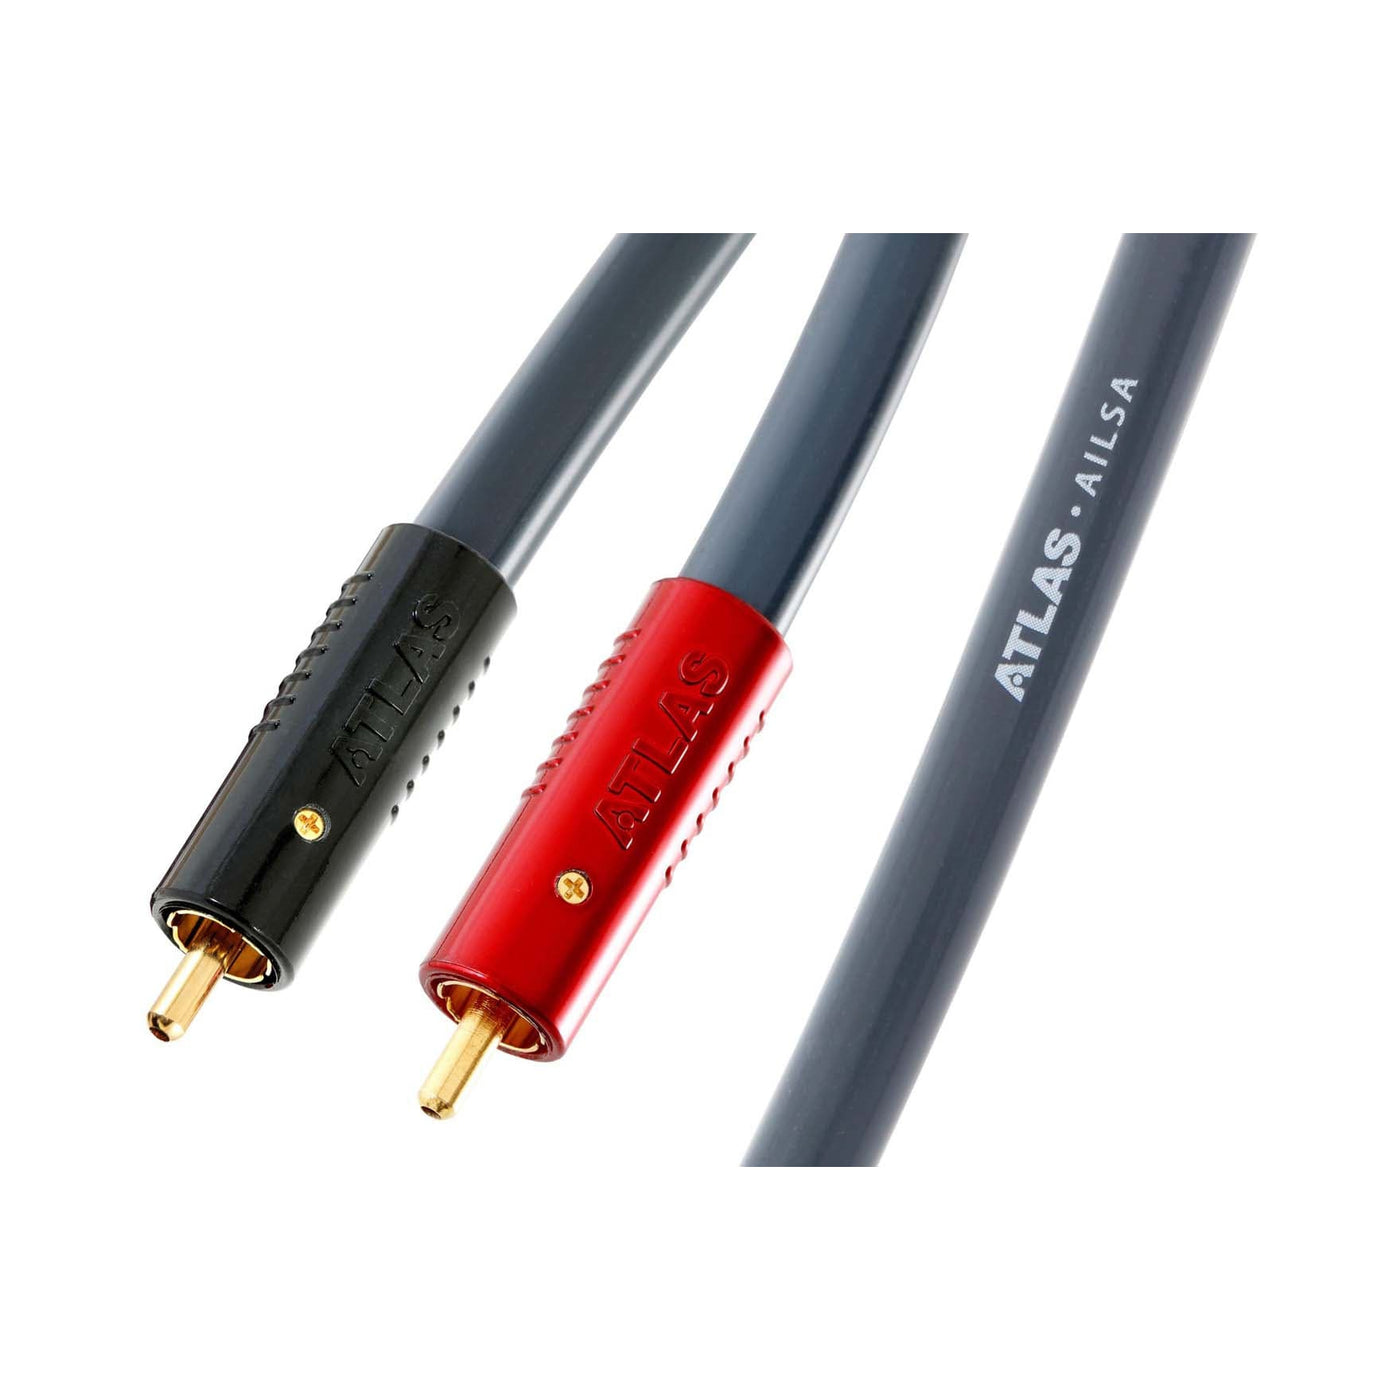 Atlas Ailsa Achromatic RCA Interconnect Cable at Audio Influence